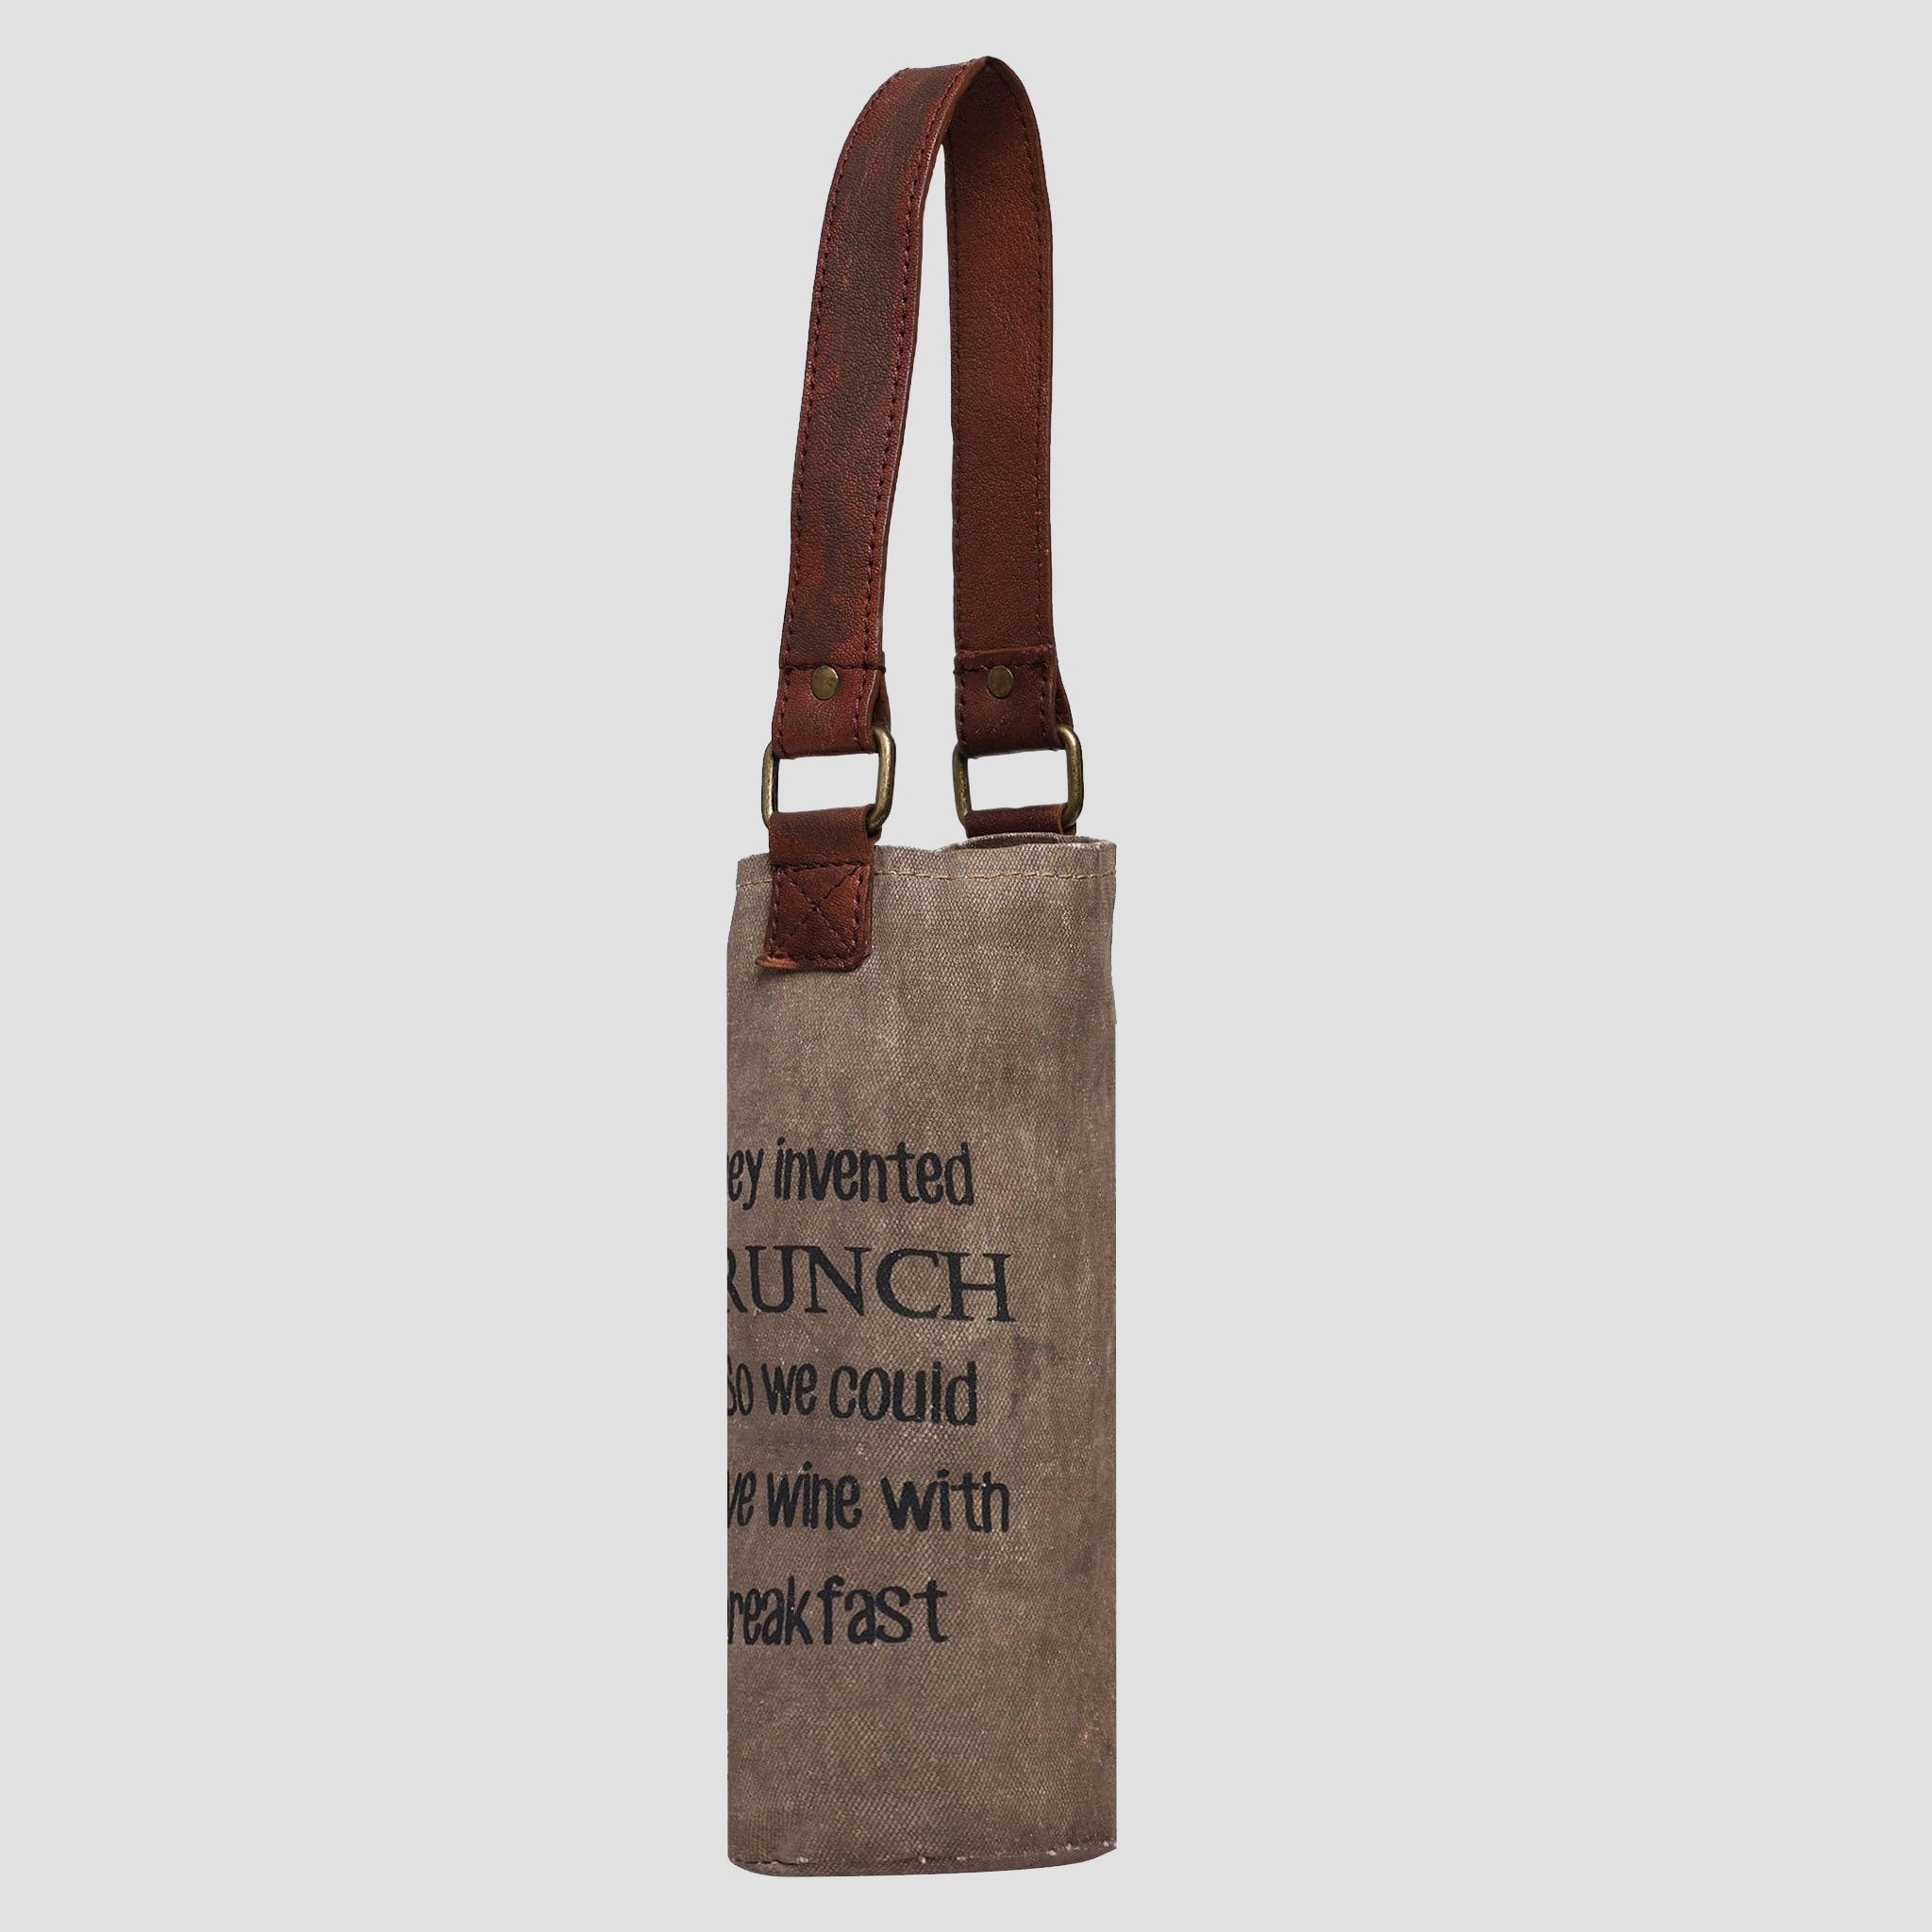 Mona-B Bag Mona B 100% Canvas Wine Bags Perfect to give as a Gift or for Yourself as You New go-to Wine Bag (Brunch)